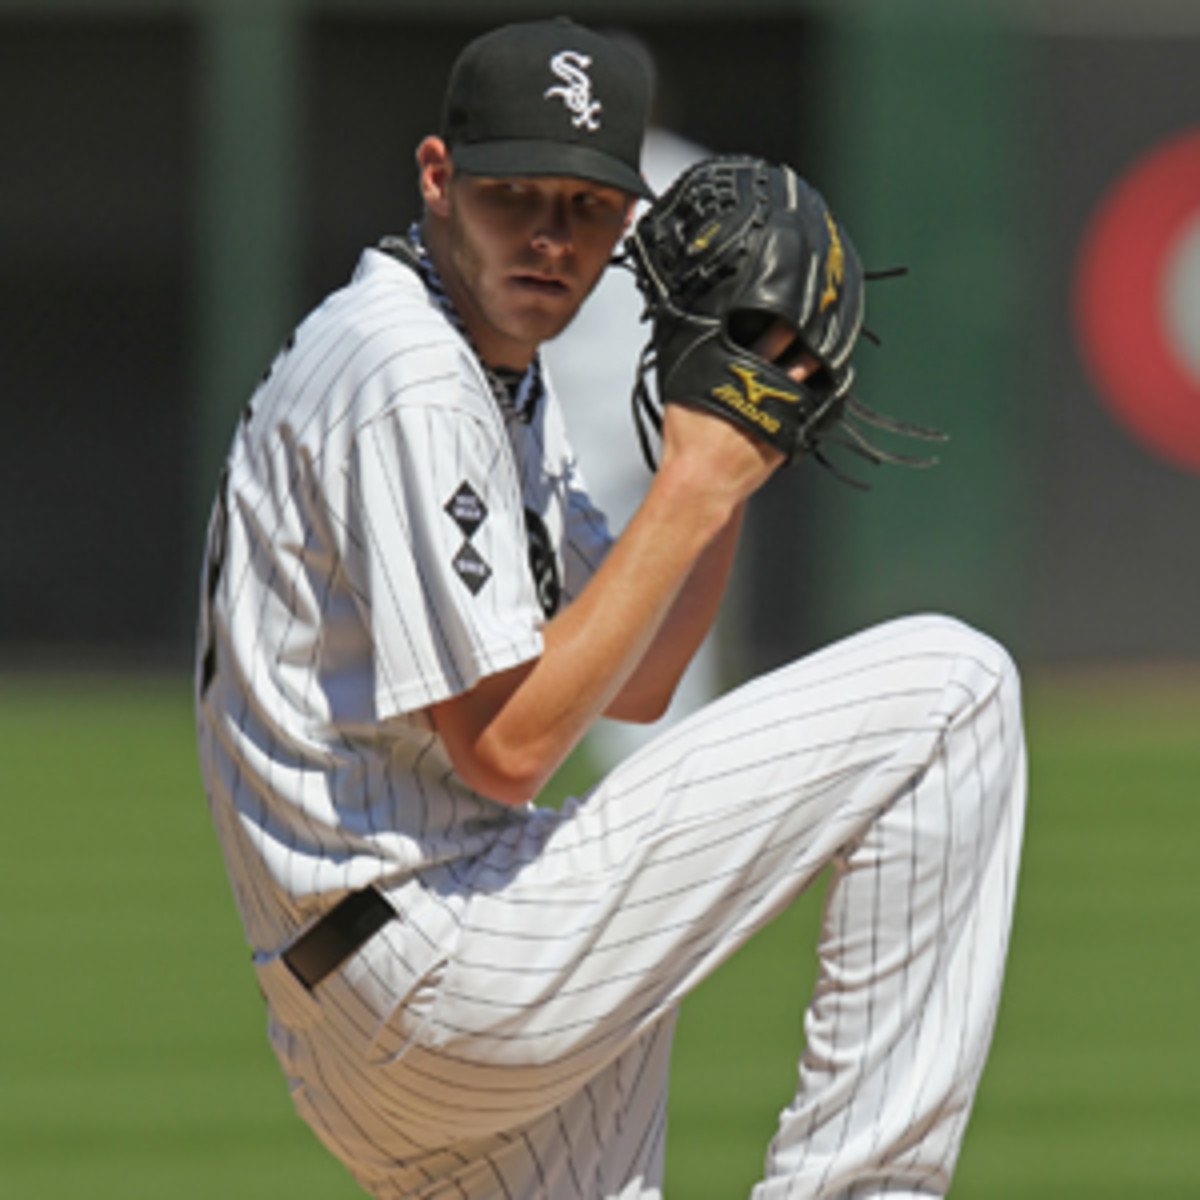 Chris Sale was 17-8 in his first season as a starter. (Jonathan Daniel/Getty Images)